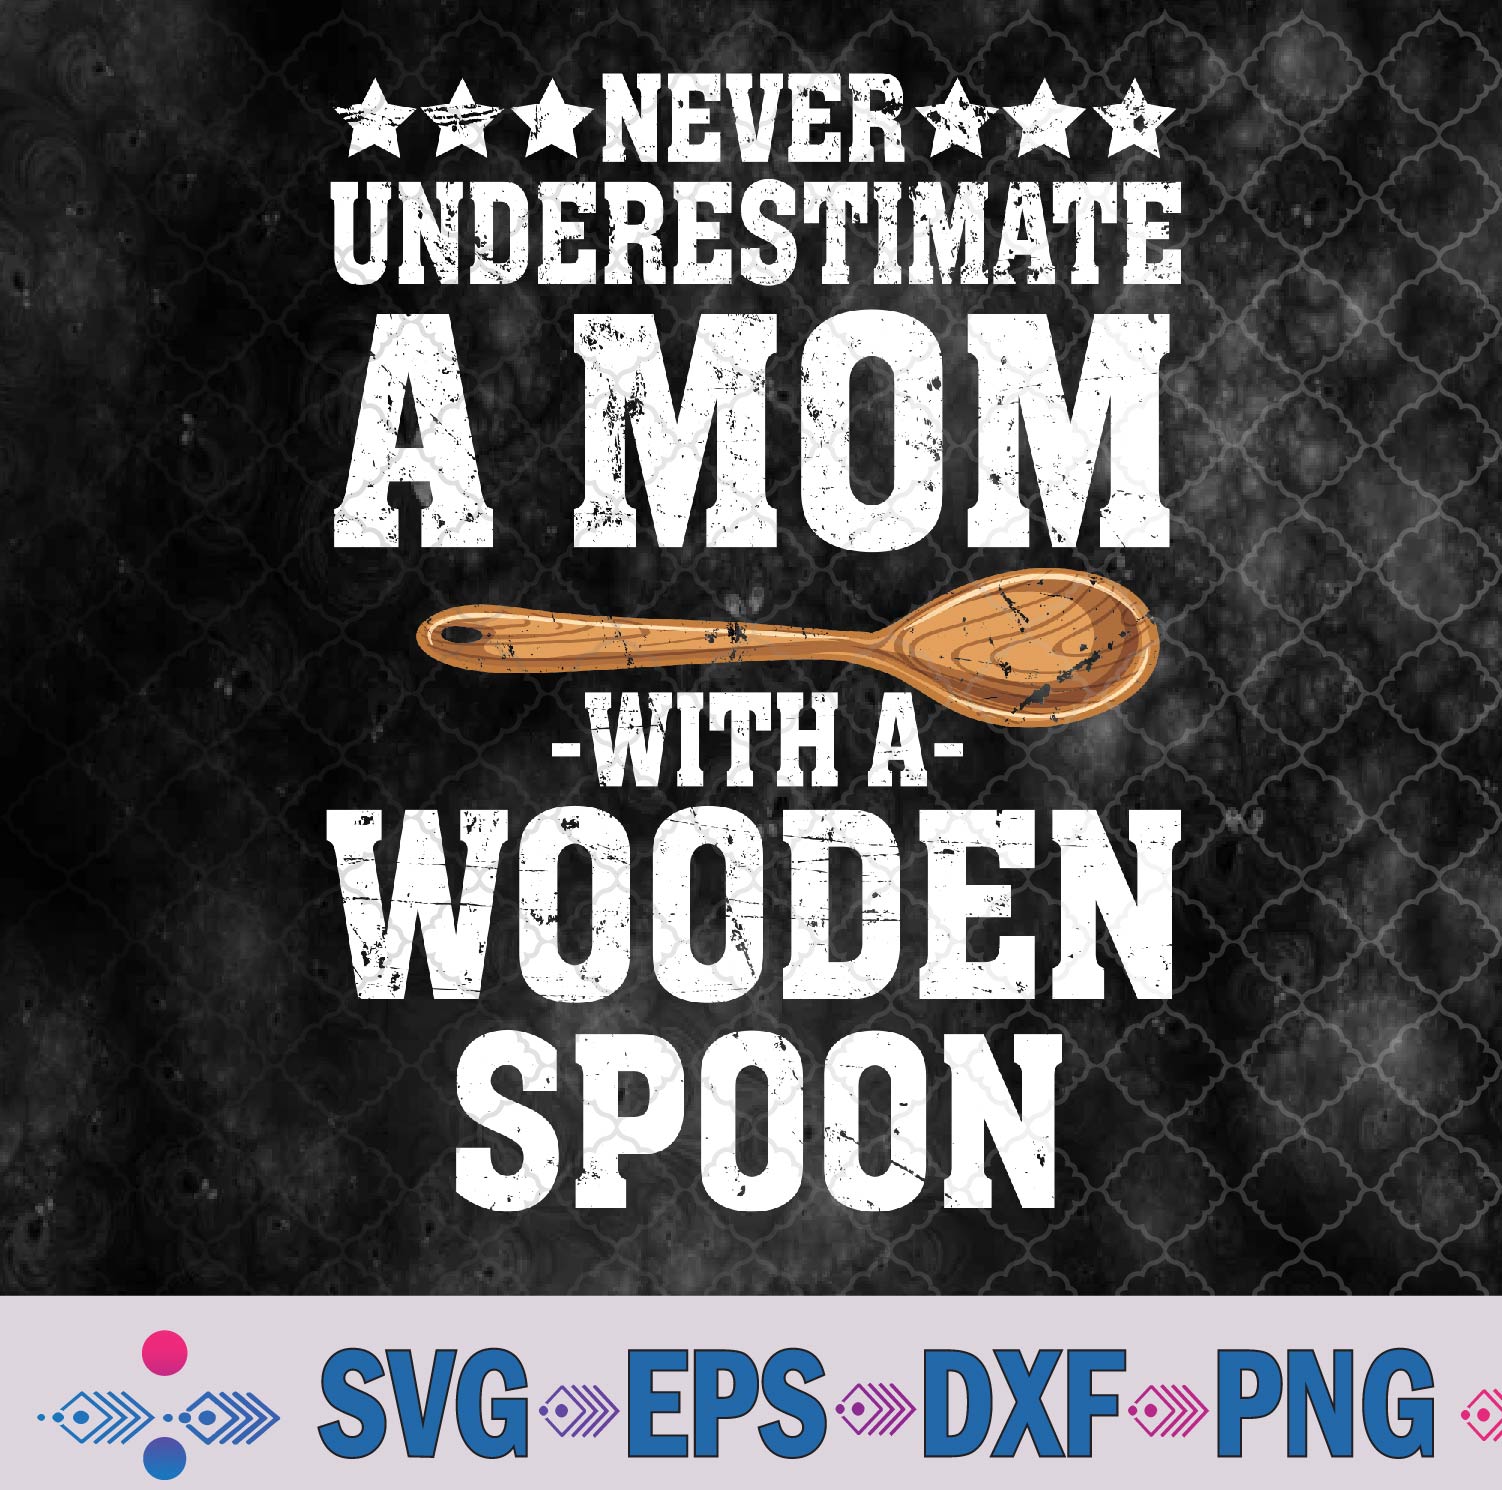 Funny Wooden Spoon Survivor Mom With A Wooden Spoon Svg, Png, Digital Download